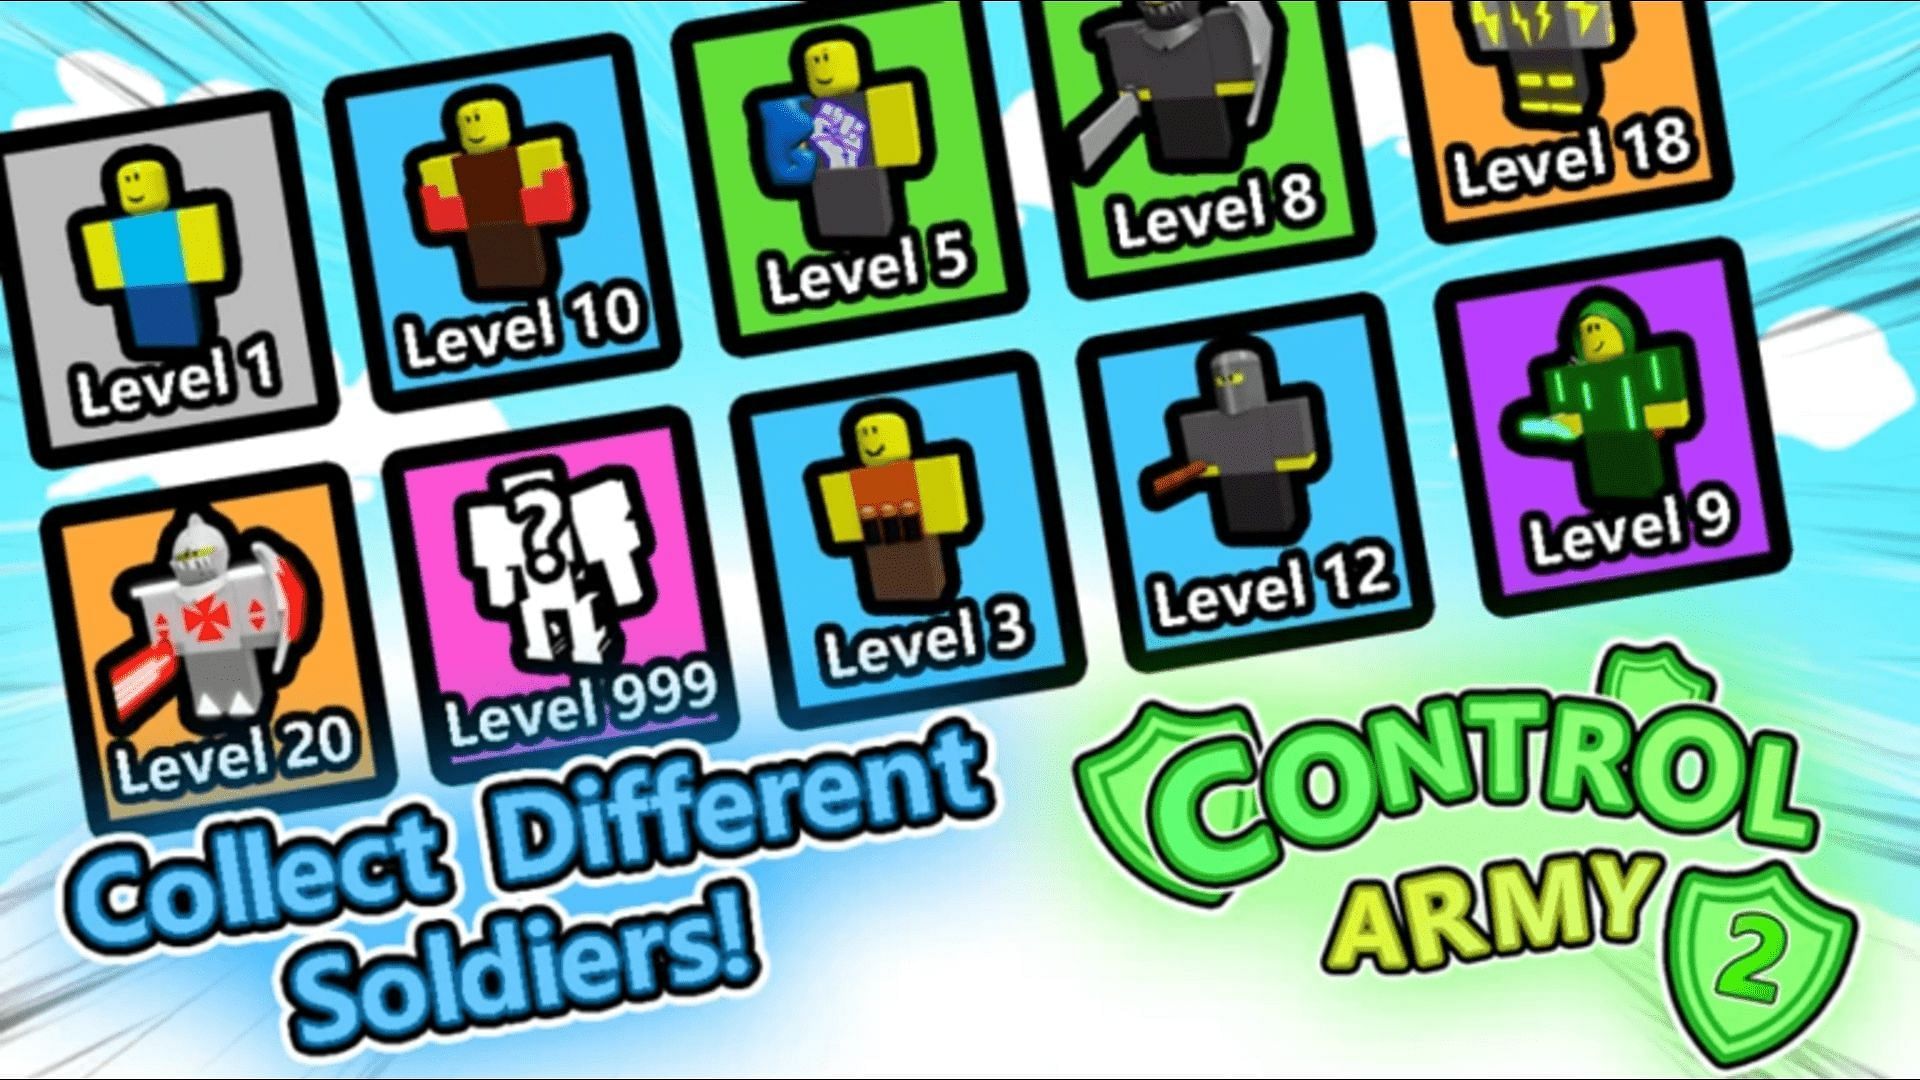 Active codes for Control Army 2 (Image via Roblox)